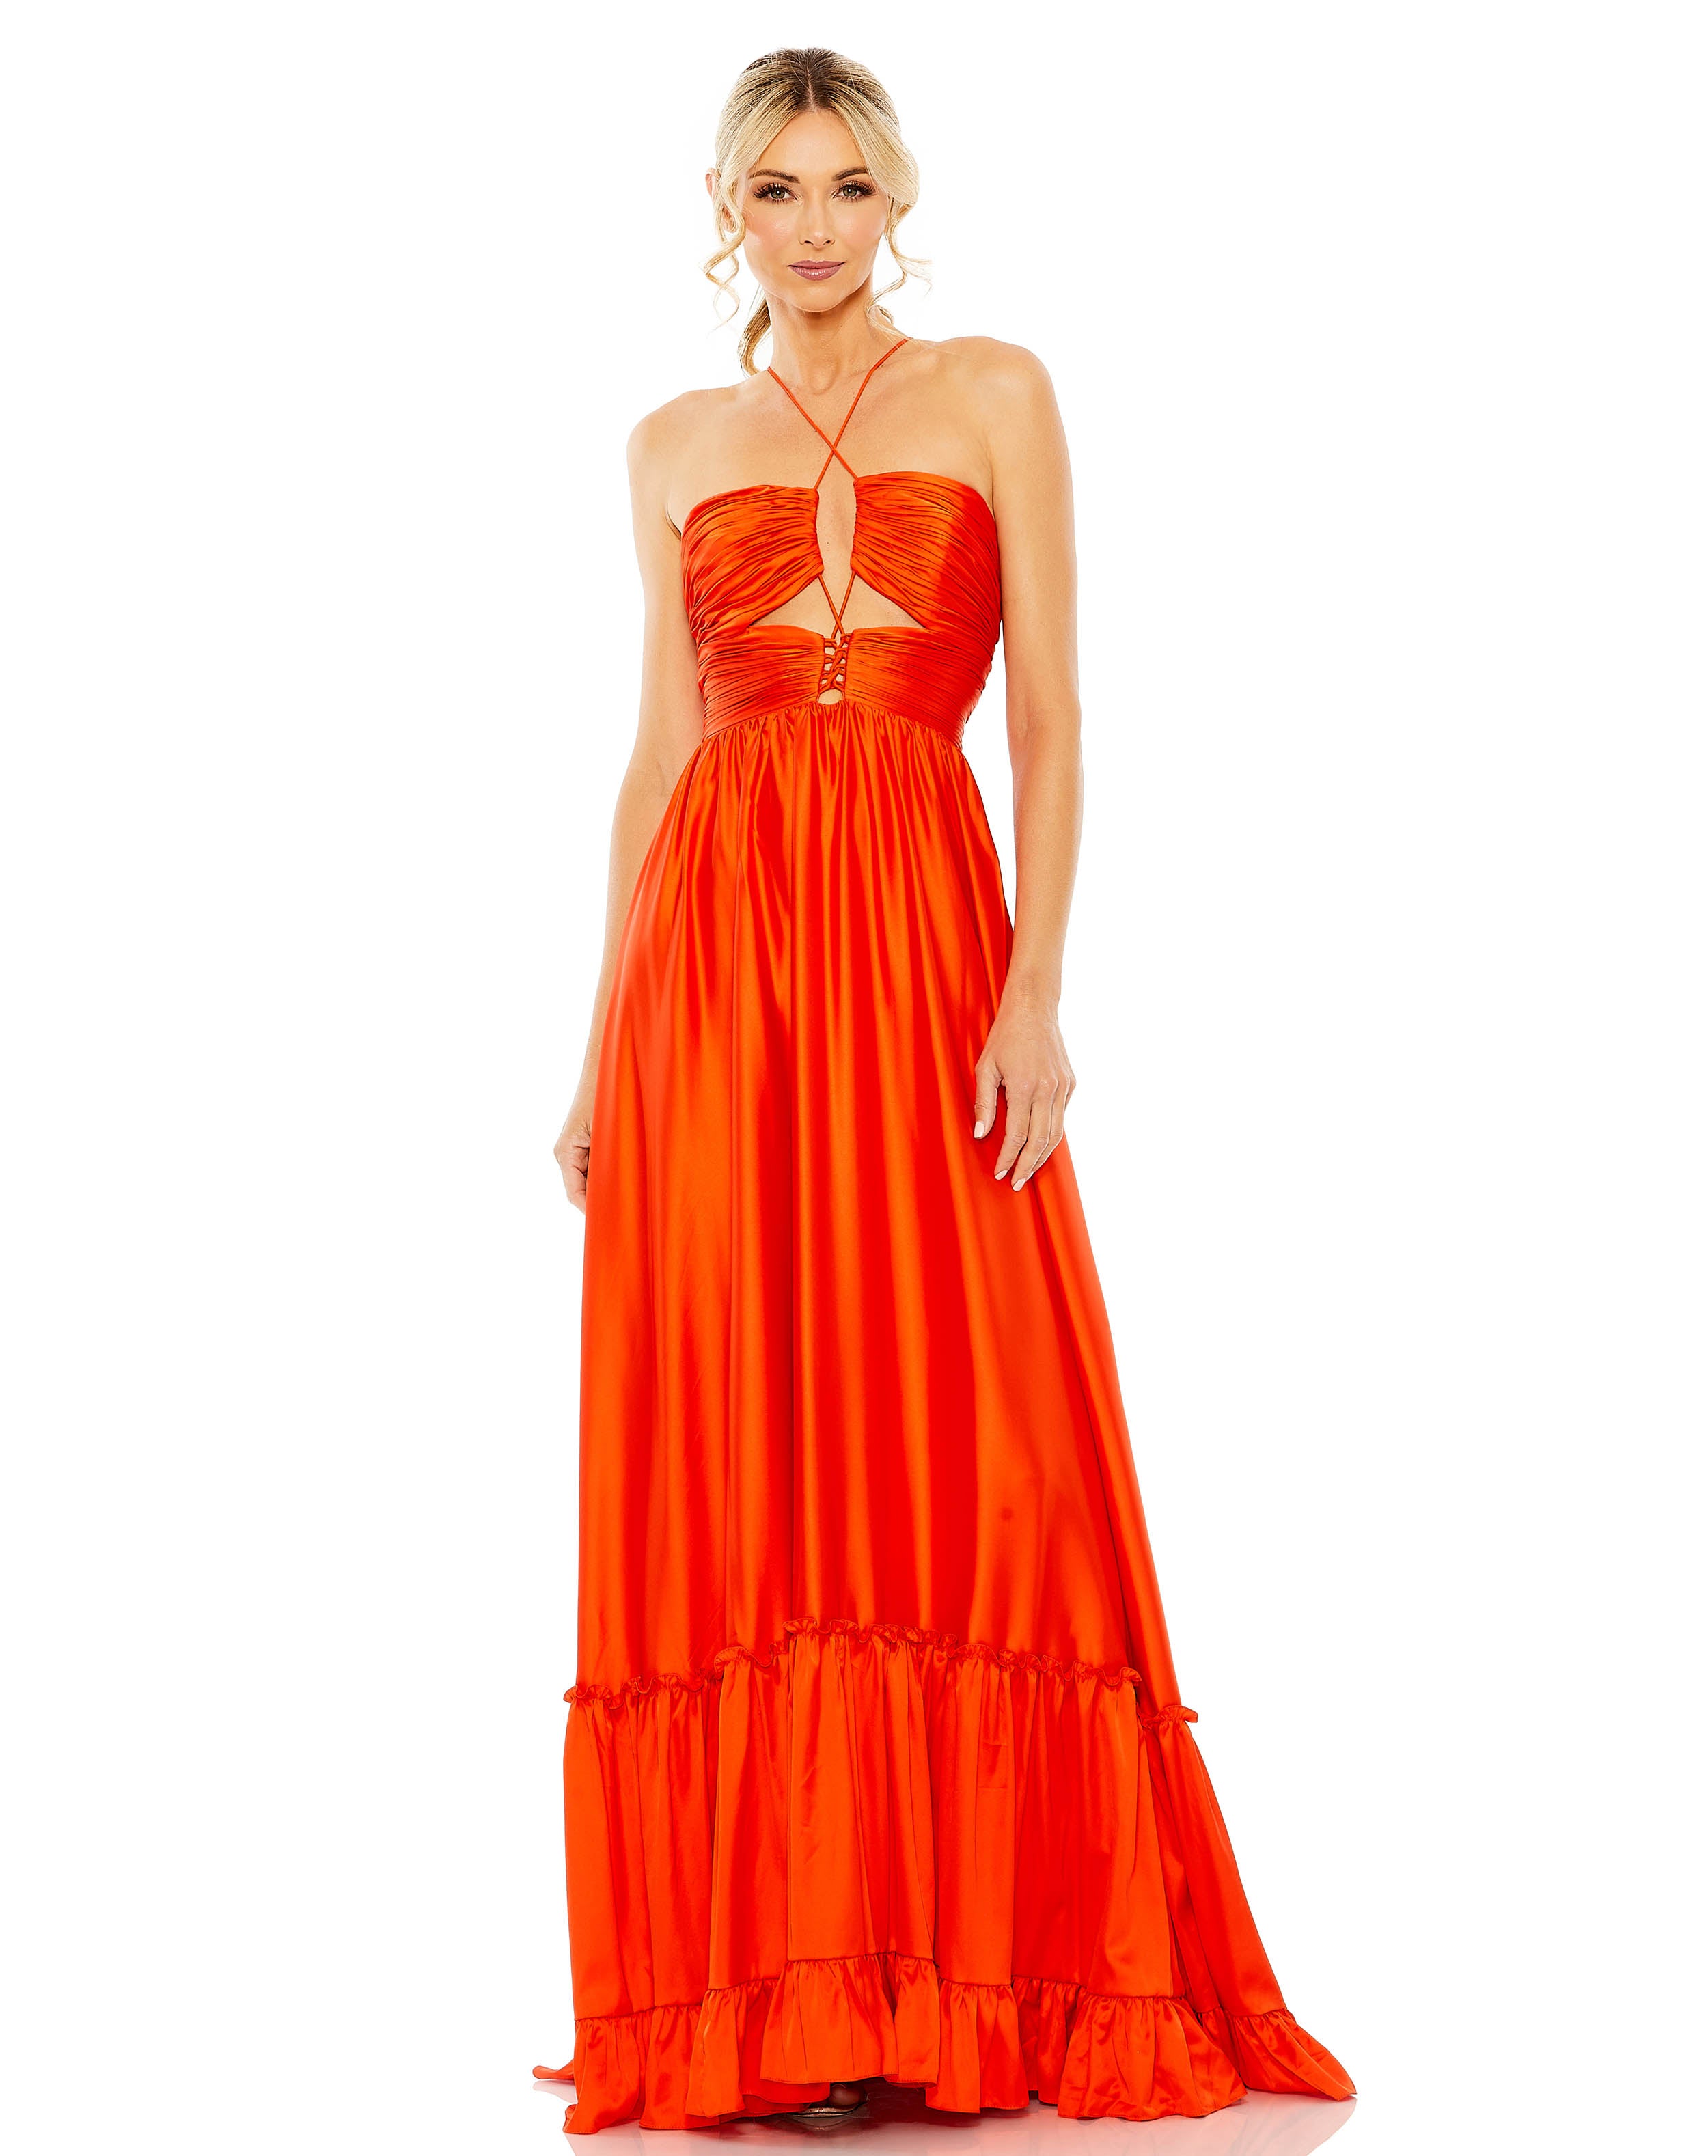 Ruched Tiered Criss Cross Spaghetti Strap Gown